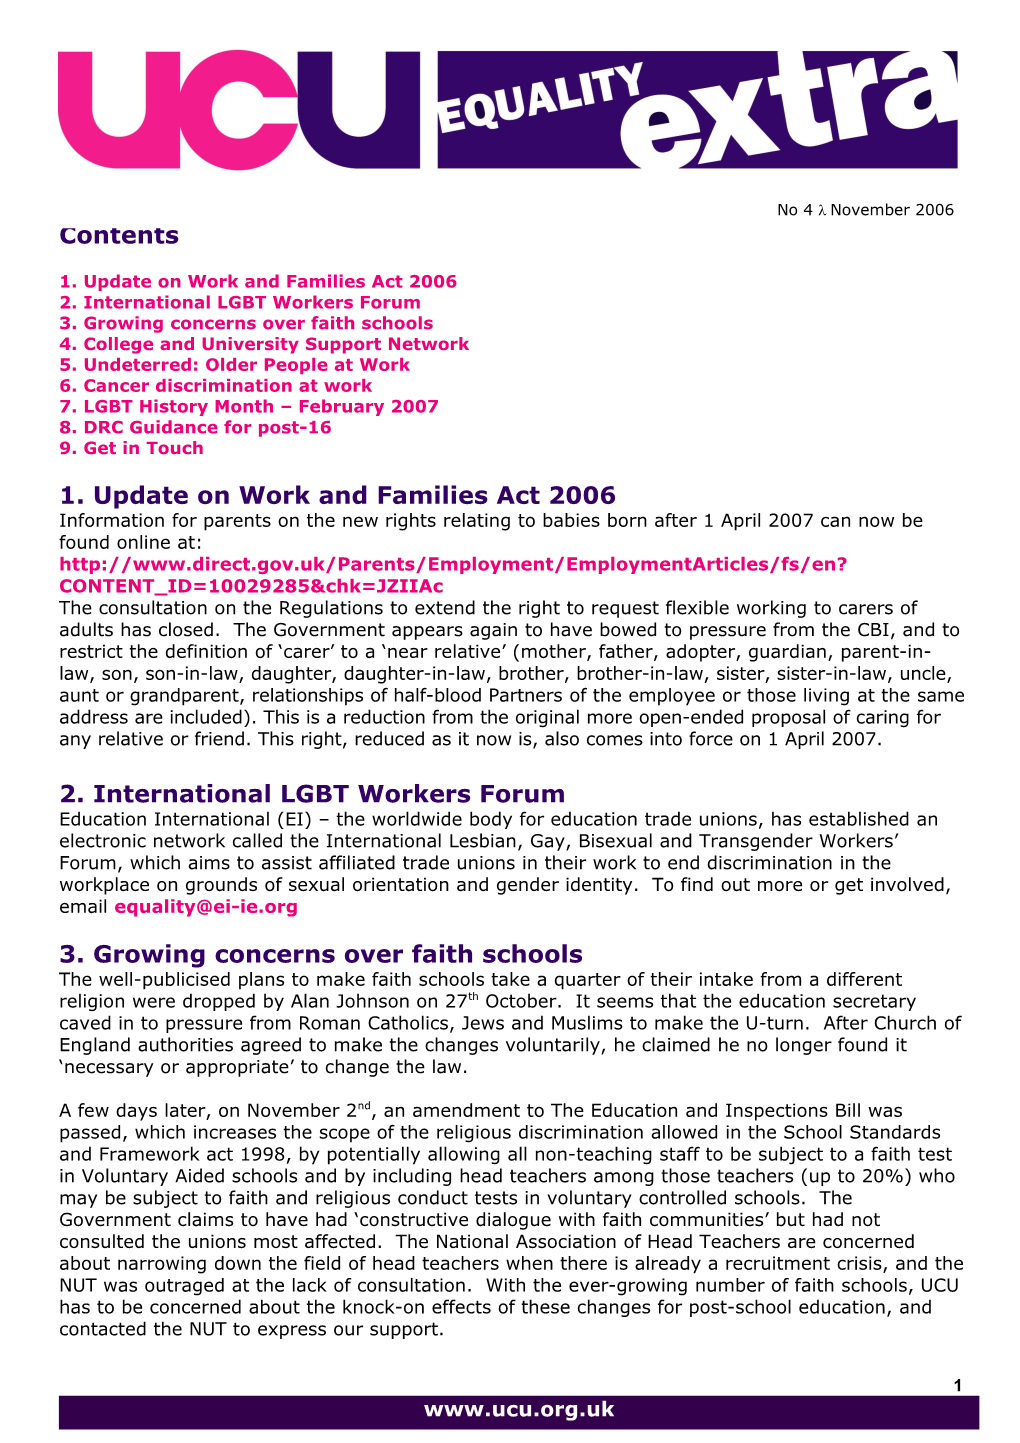 1. Update on Work and Families Act 2006